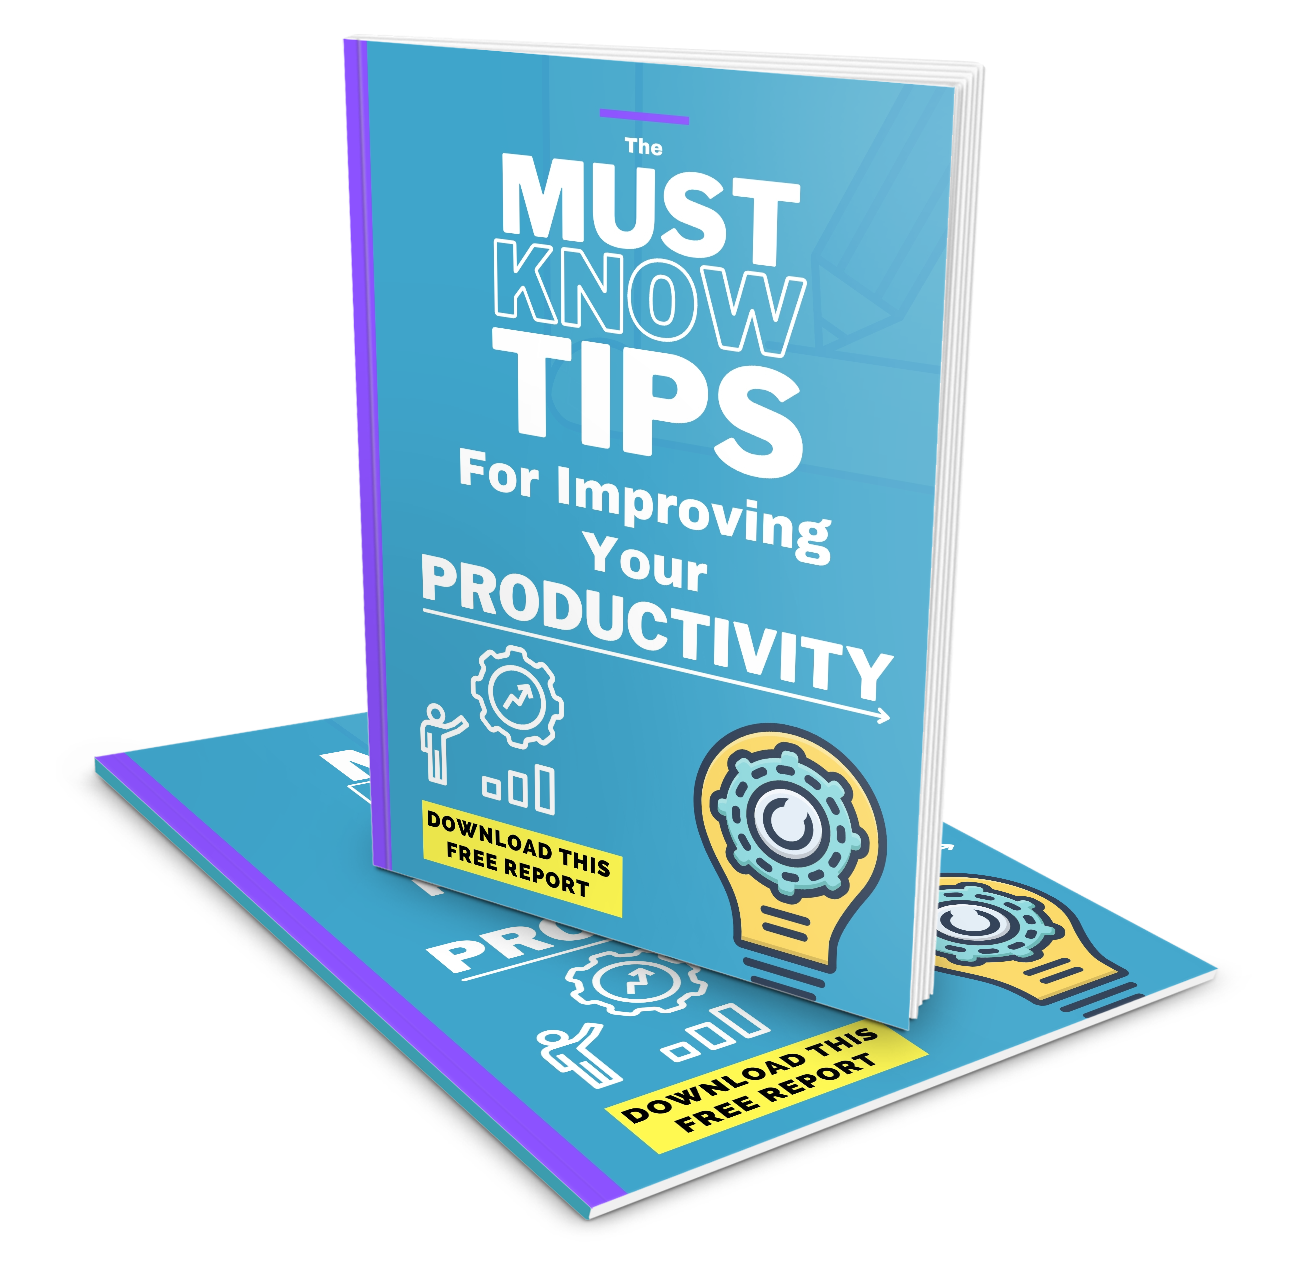 The Must Know Tips For Improving Your Productivity